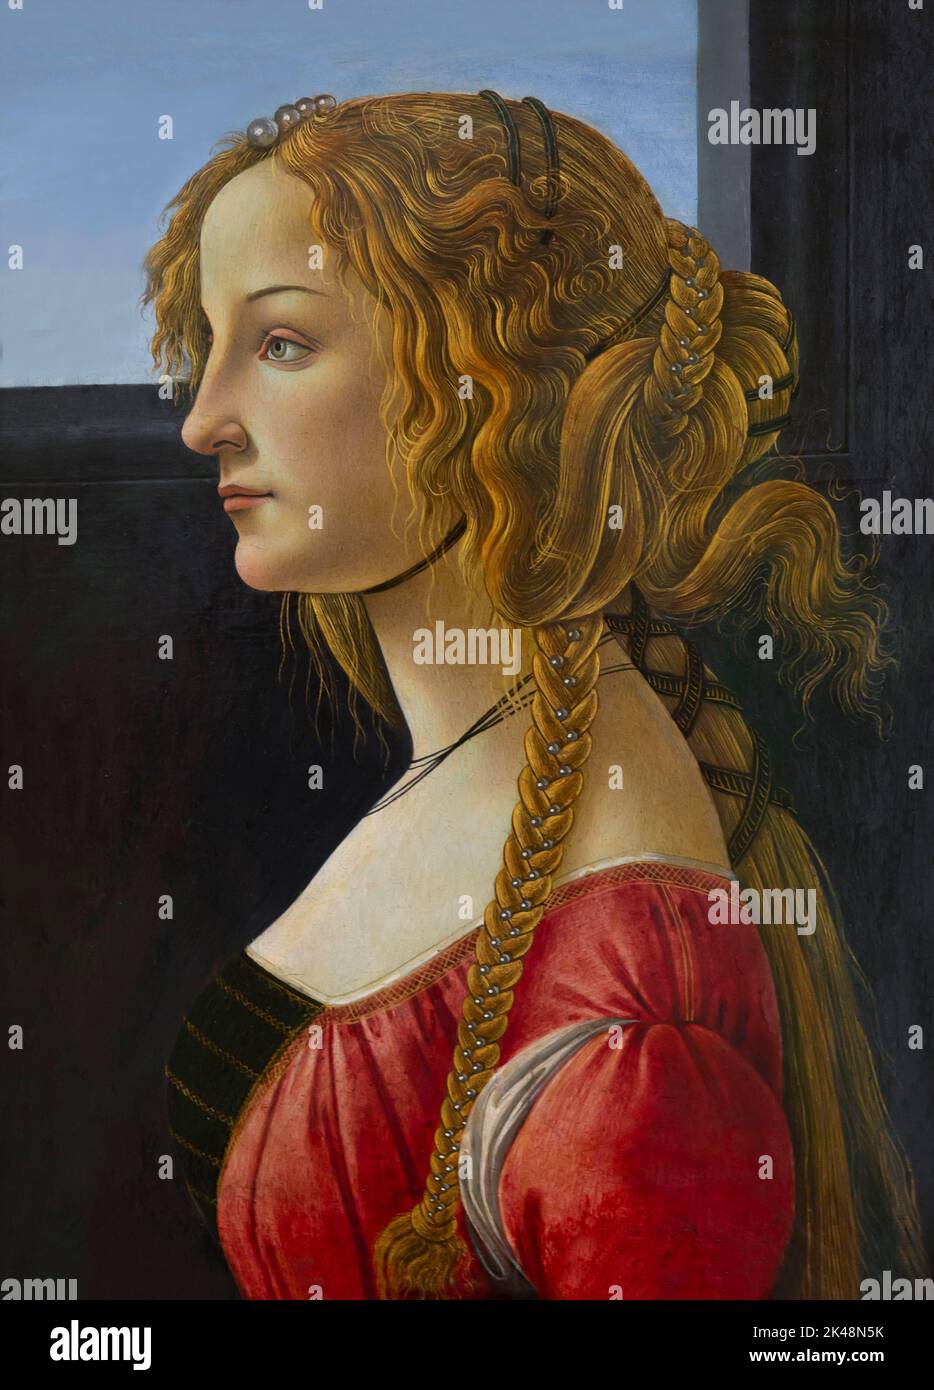 Portrait of a Young Woman, Sandro Botticelli, circa 1460-1465, Gemaldegalerie, Berlin, Germany, Europe Stock Photo